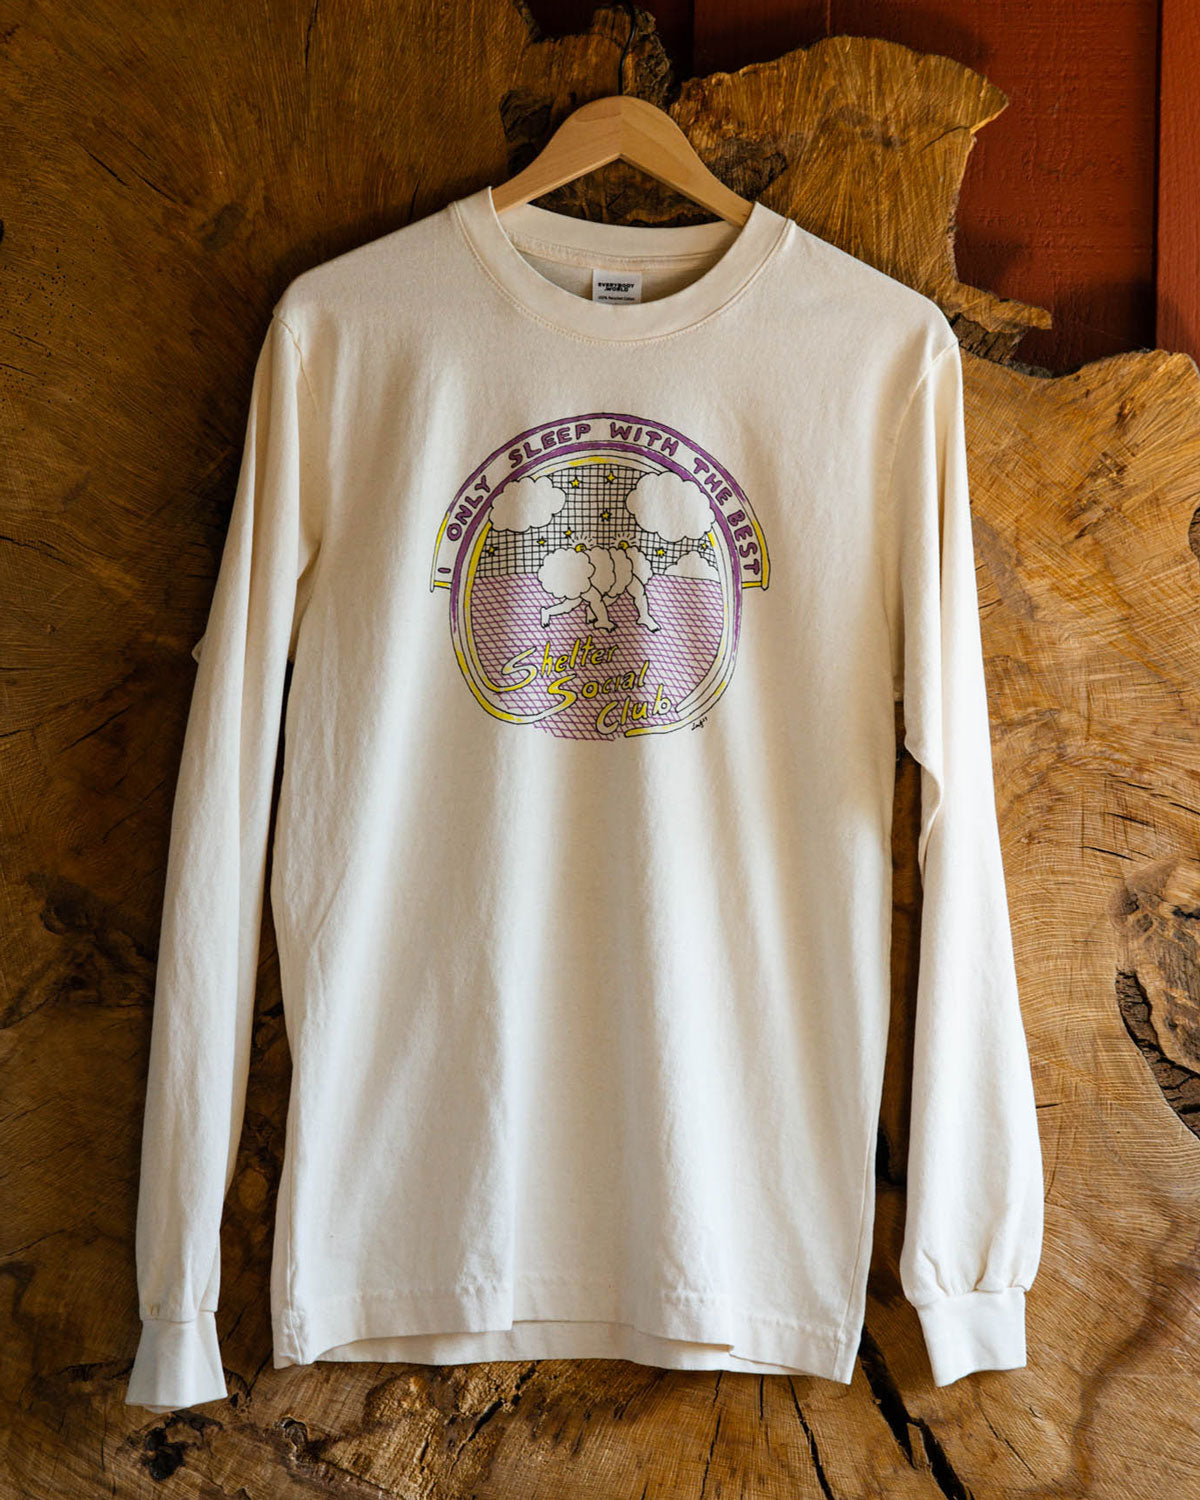 Only Sleep with the Best L/S Tee - Shelter Social Club